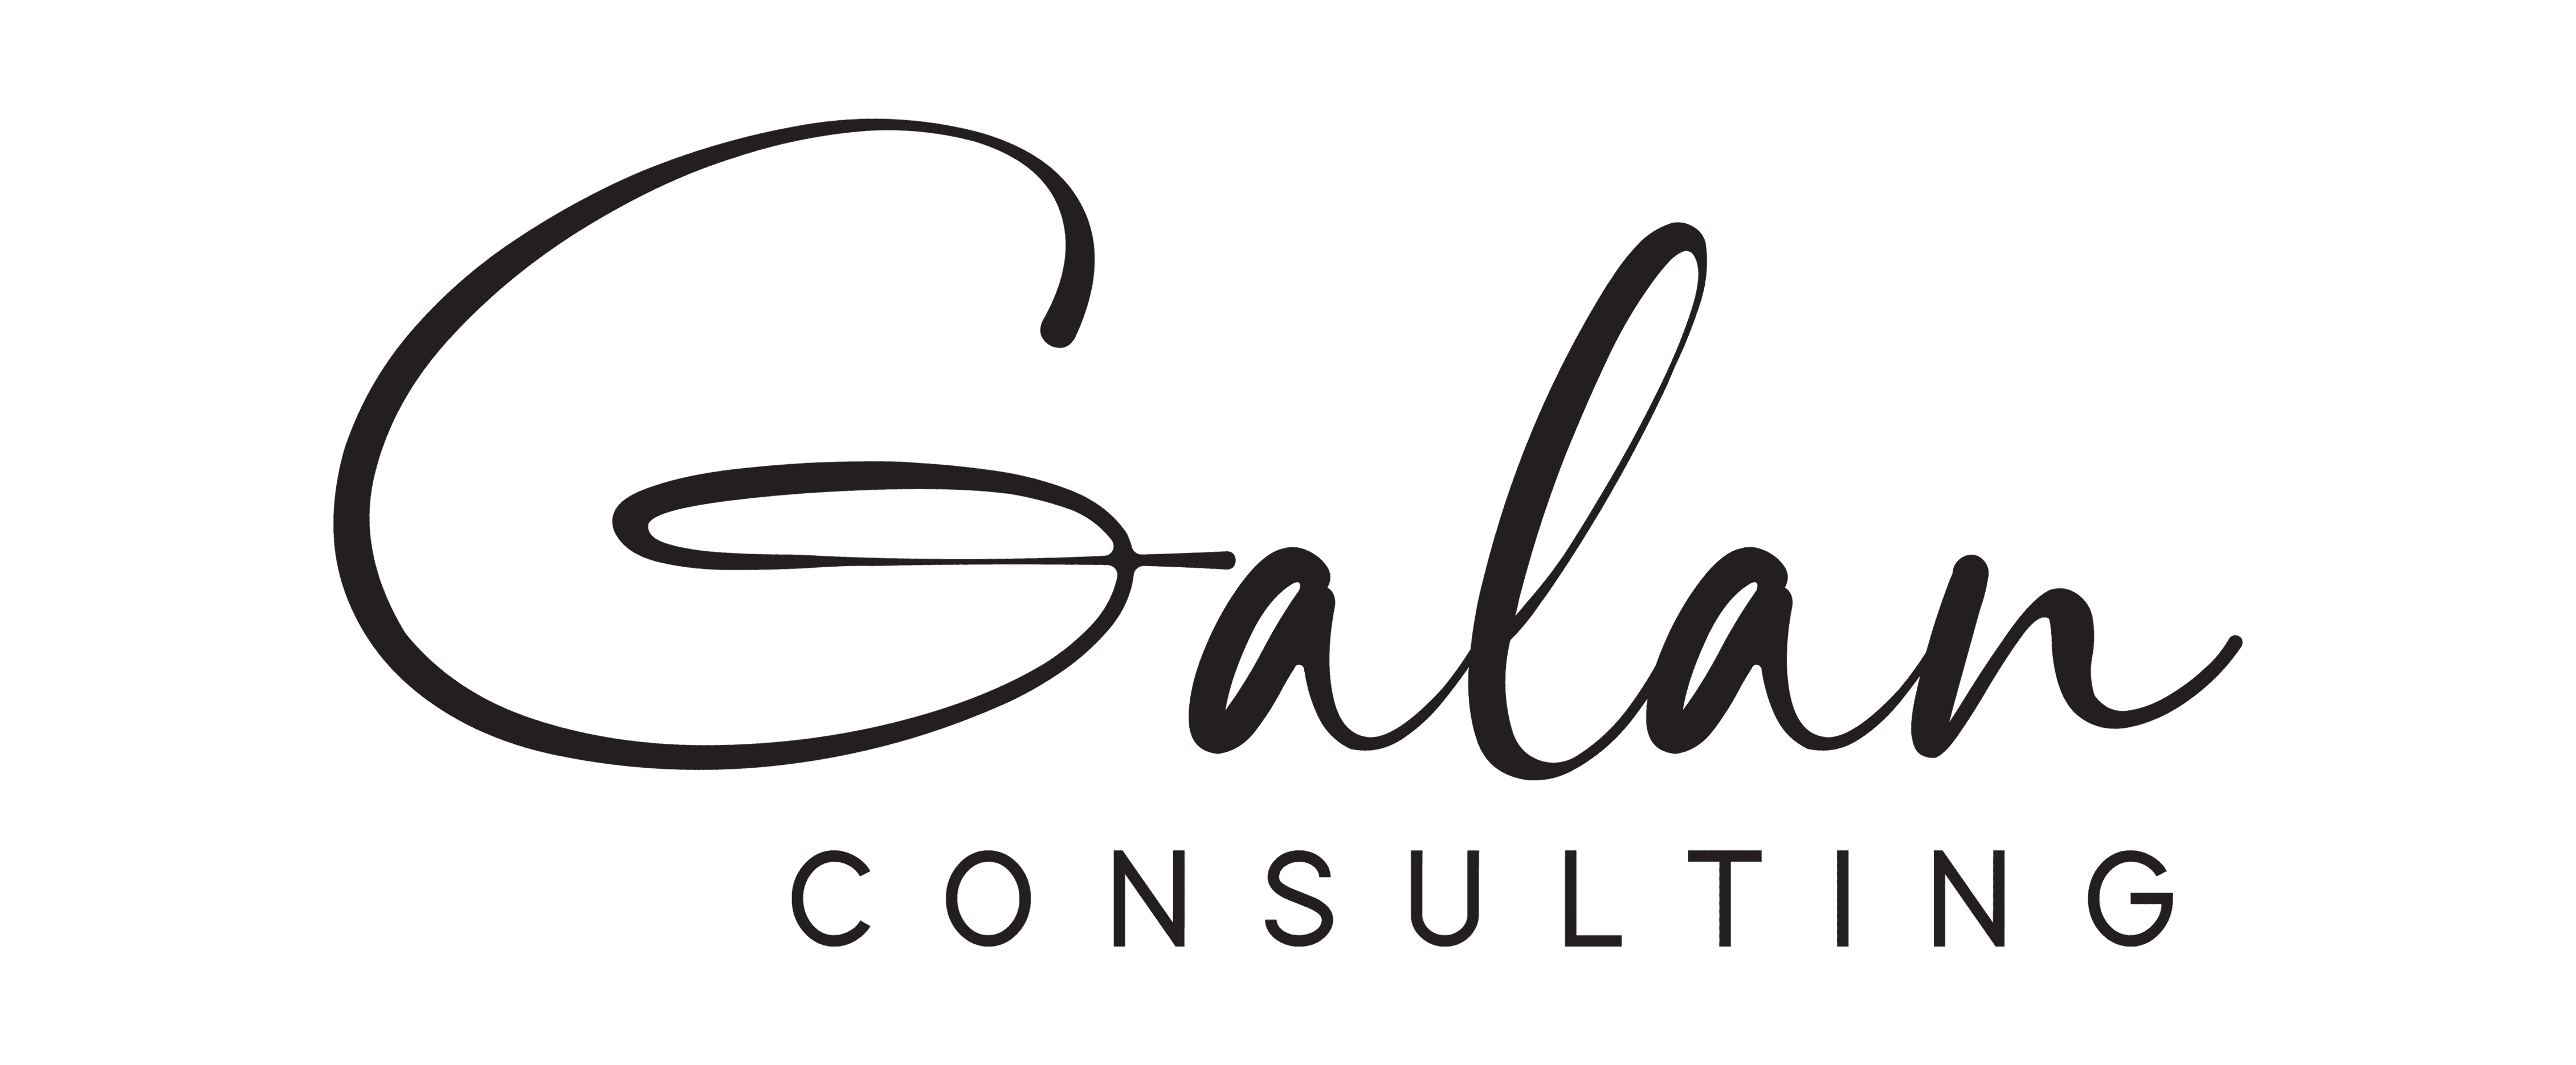 Galan Consulting